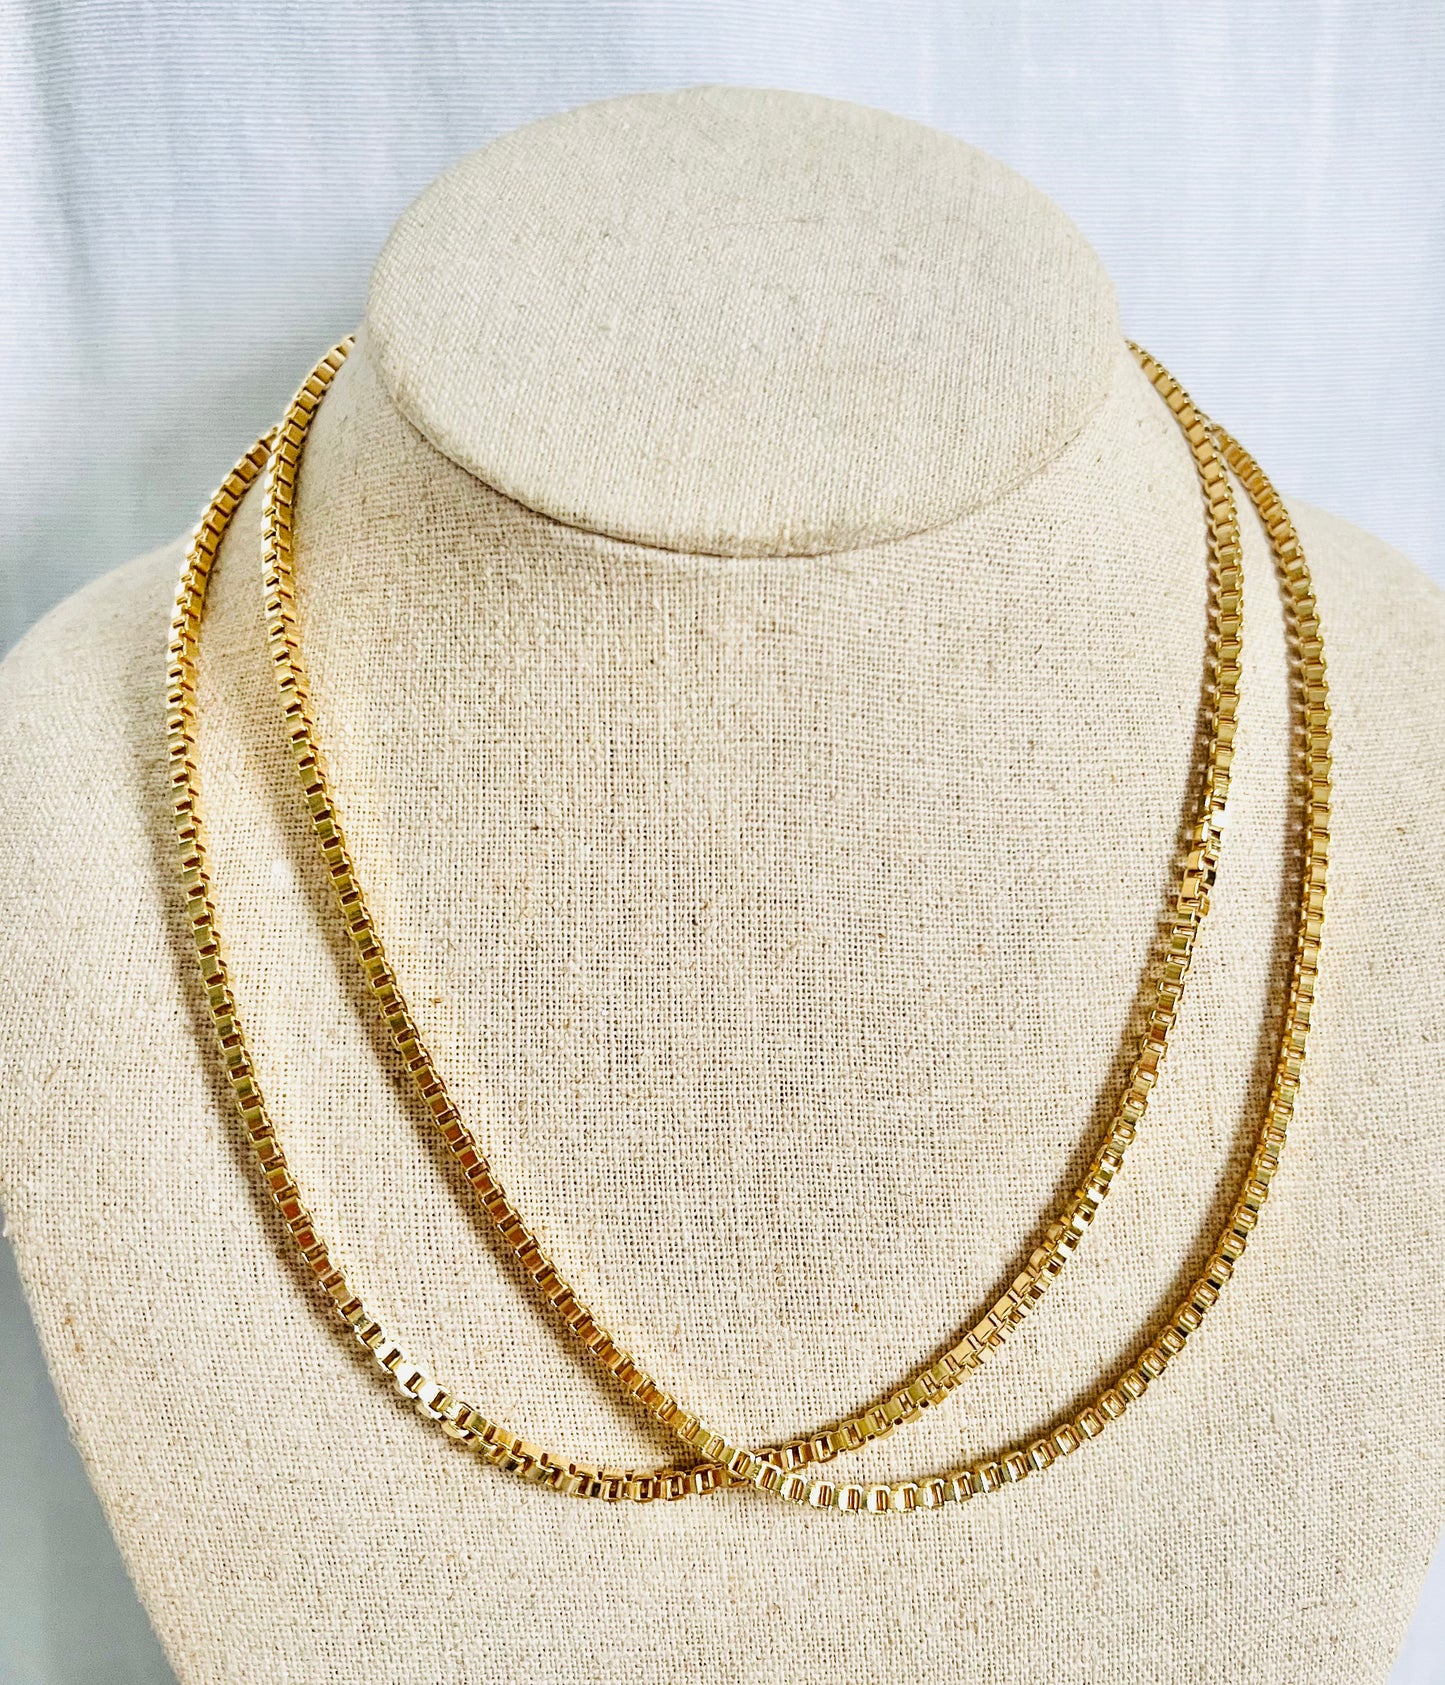 Vintage Deadstock Gold Tone Box Chain Necklace